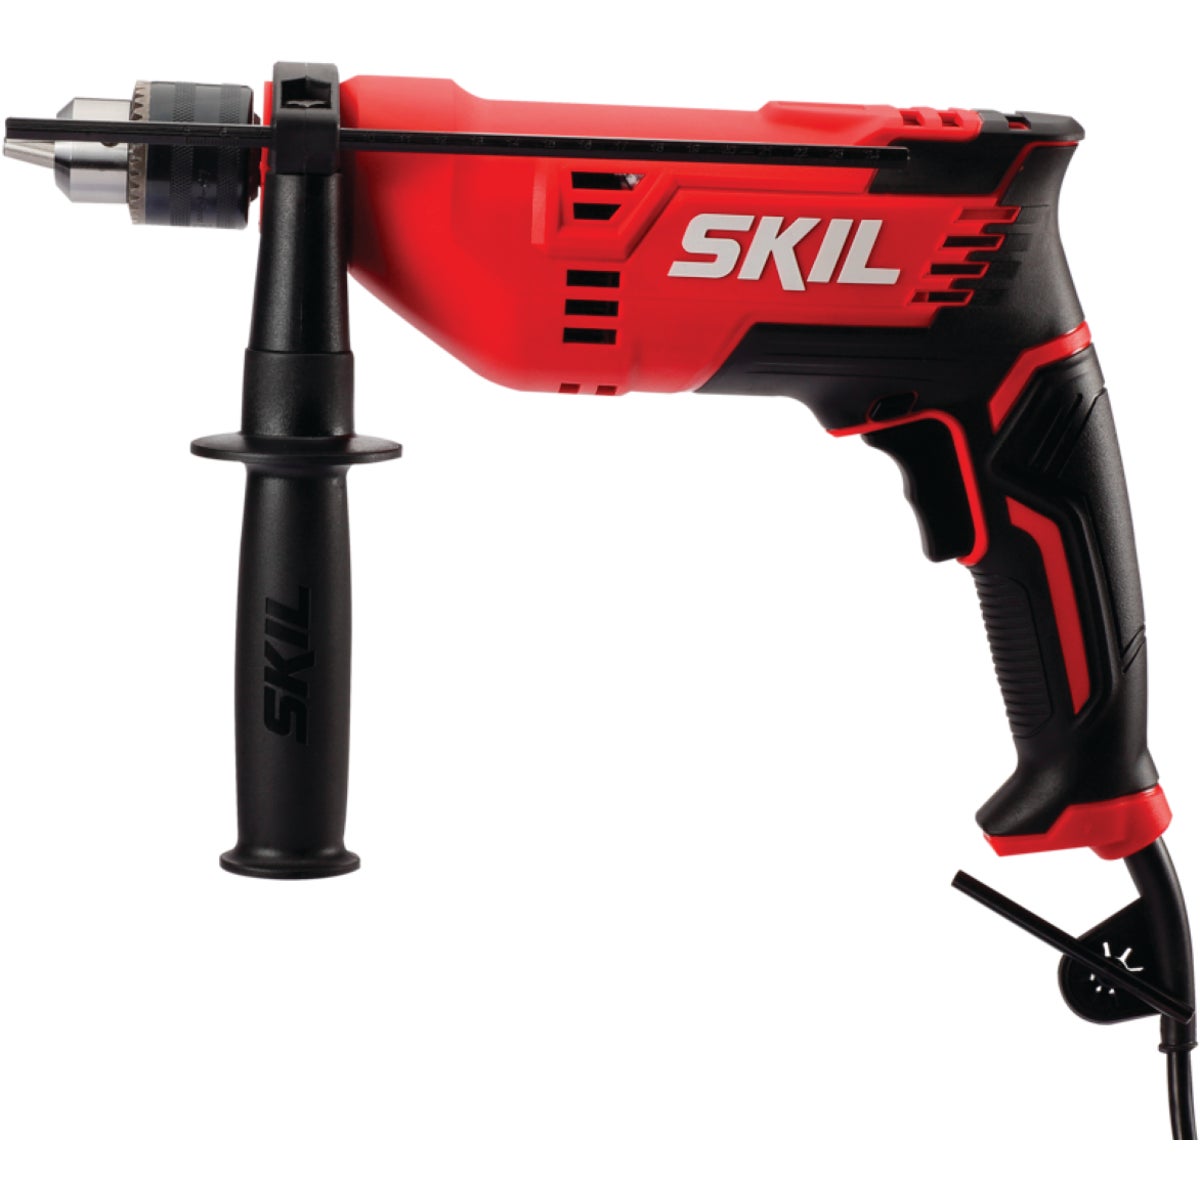 Item 375446, Get the job done with SKIL 7.5A 1/2 corded drill.